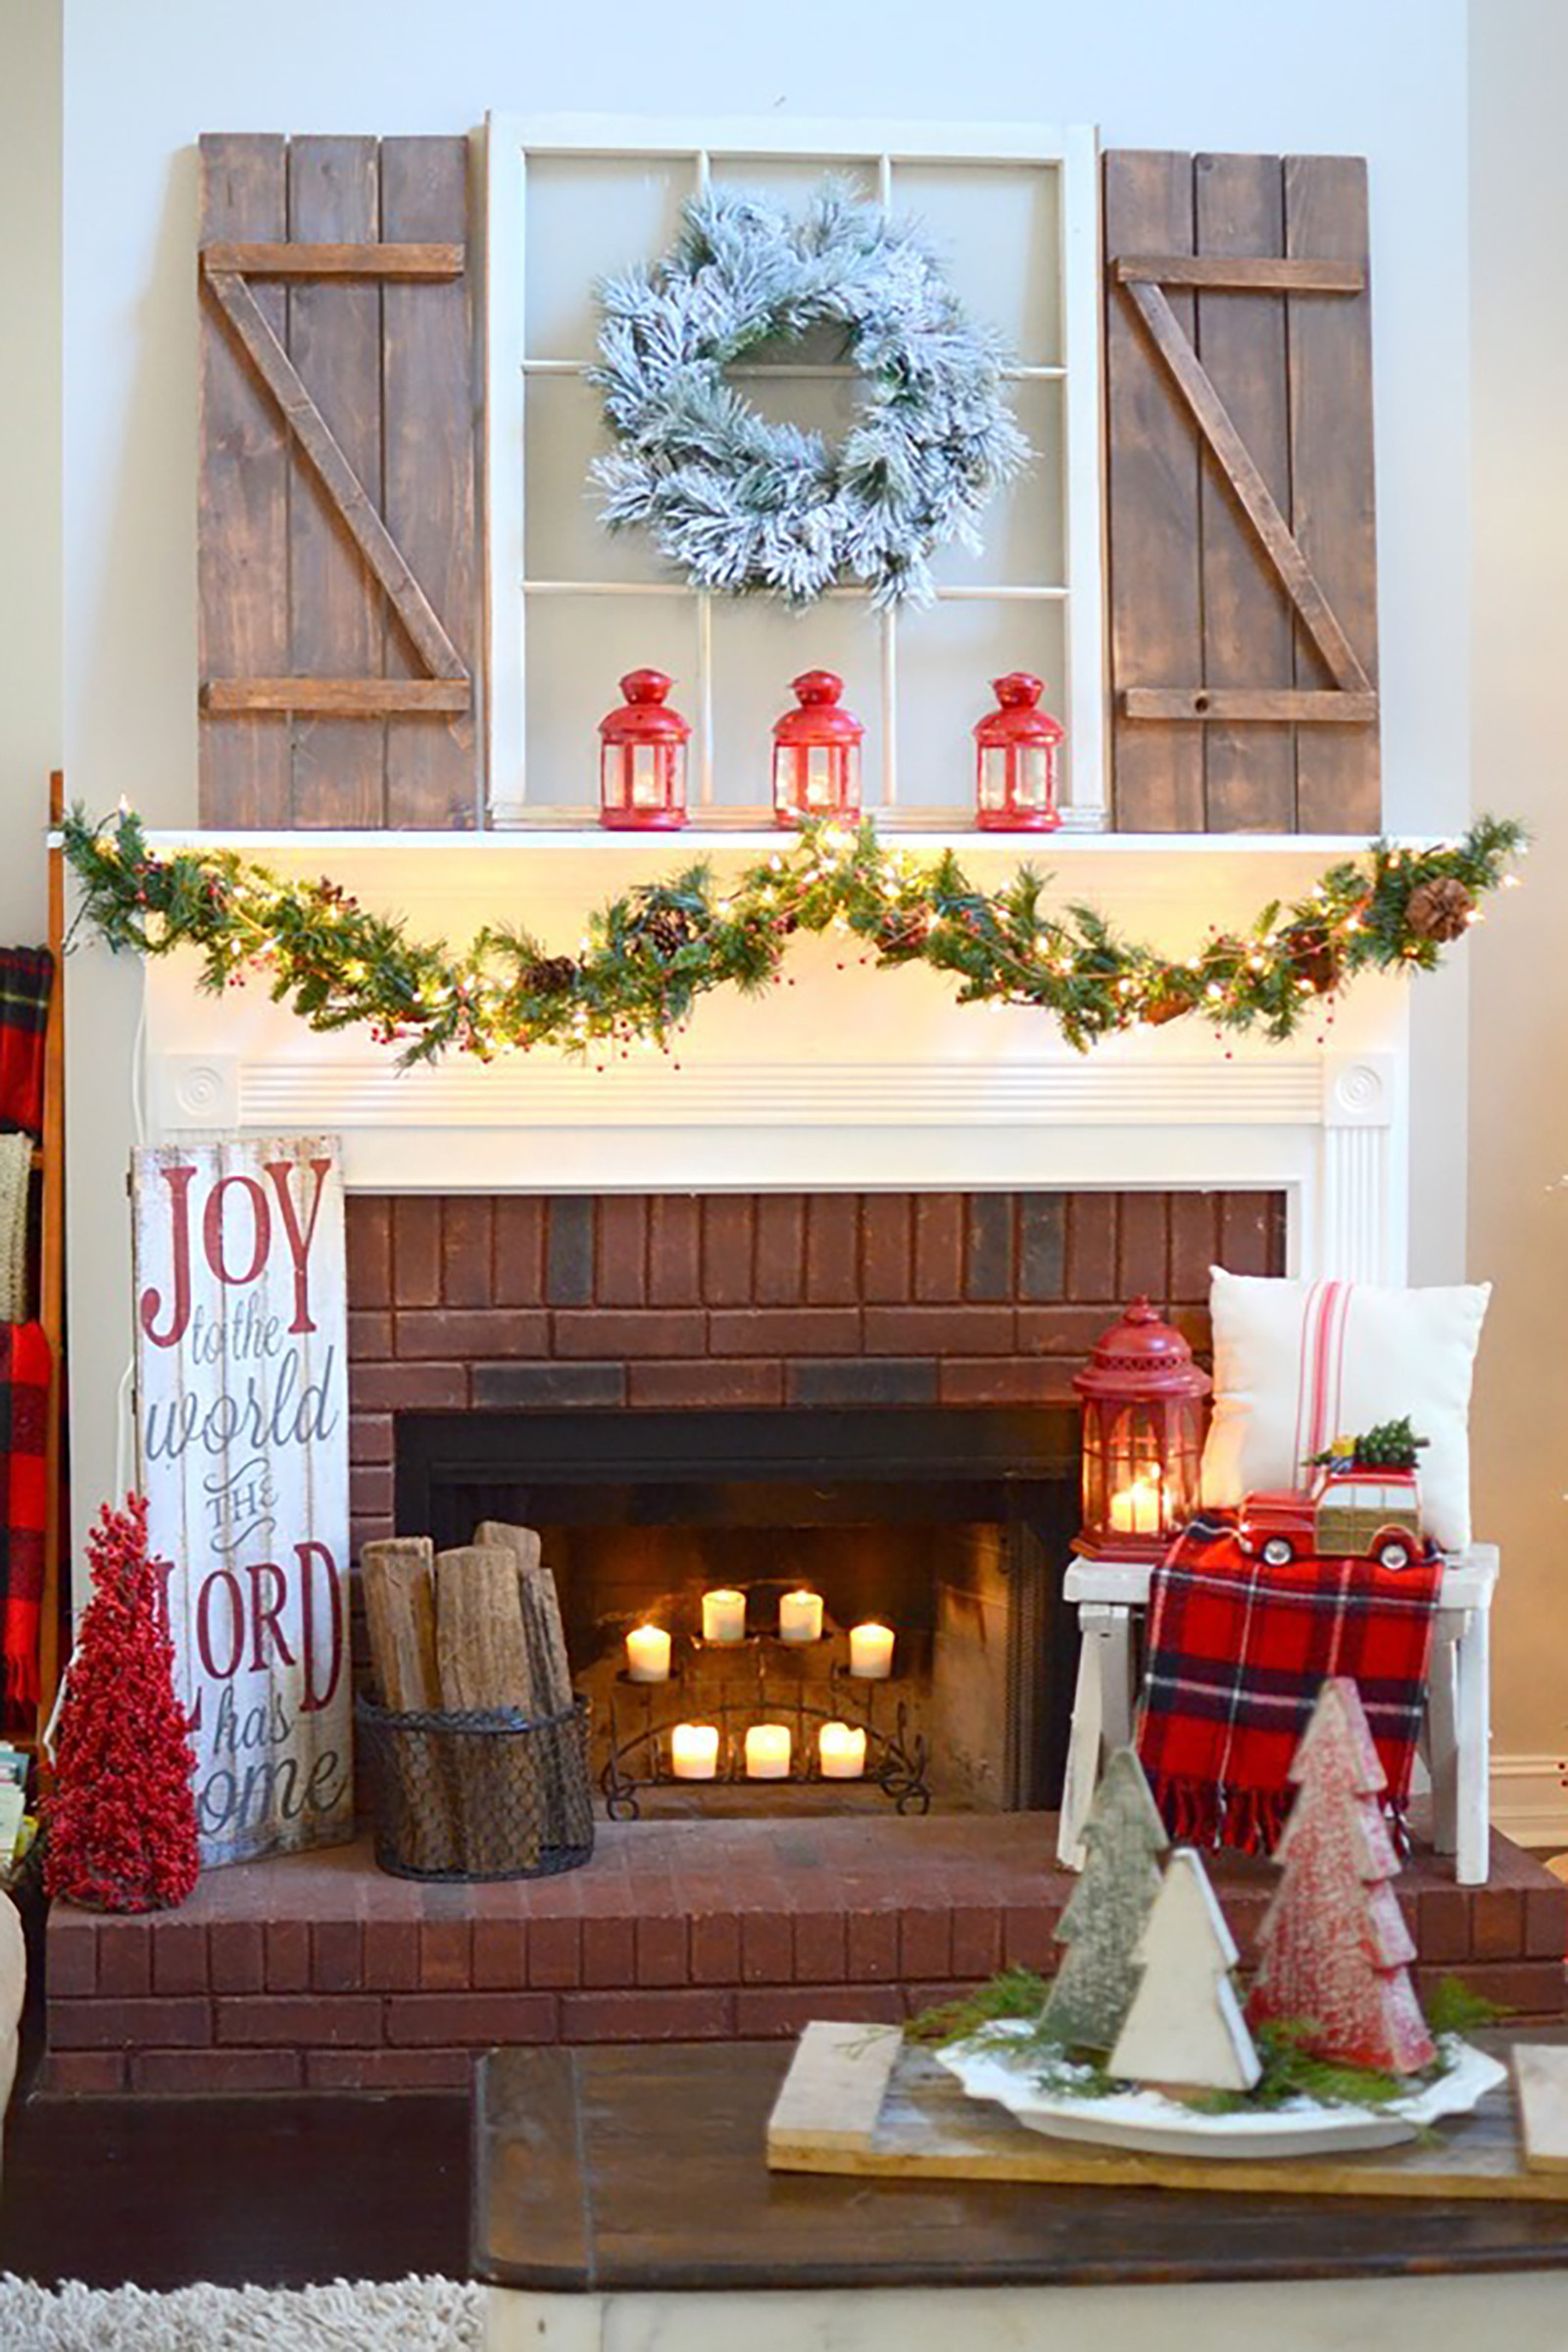 Decorating A Fireplace For Christmas
 35 Christmas Mantel Decorations Ideas for Holiday